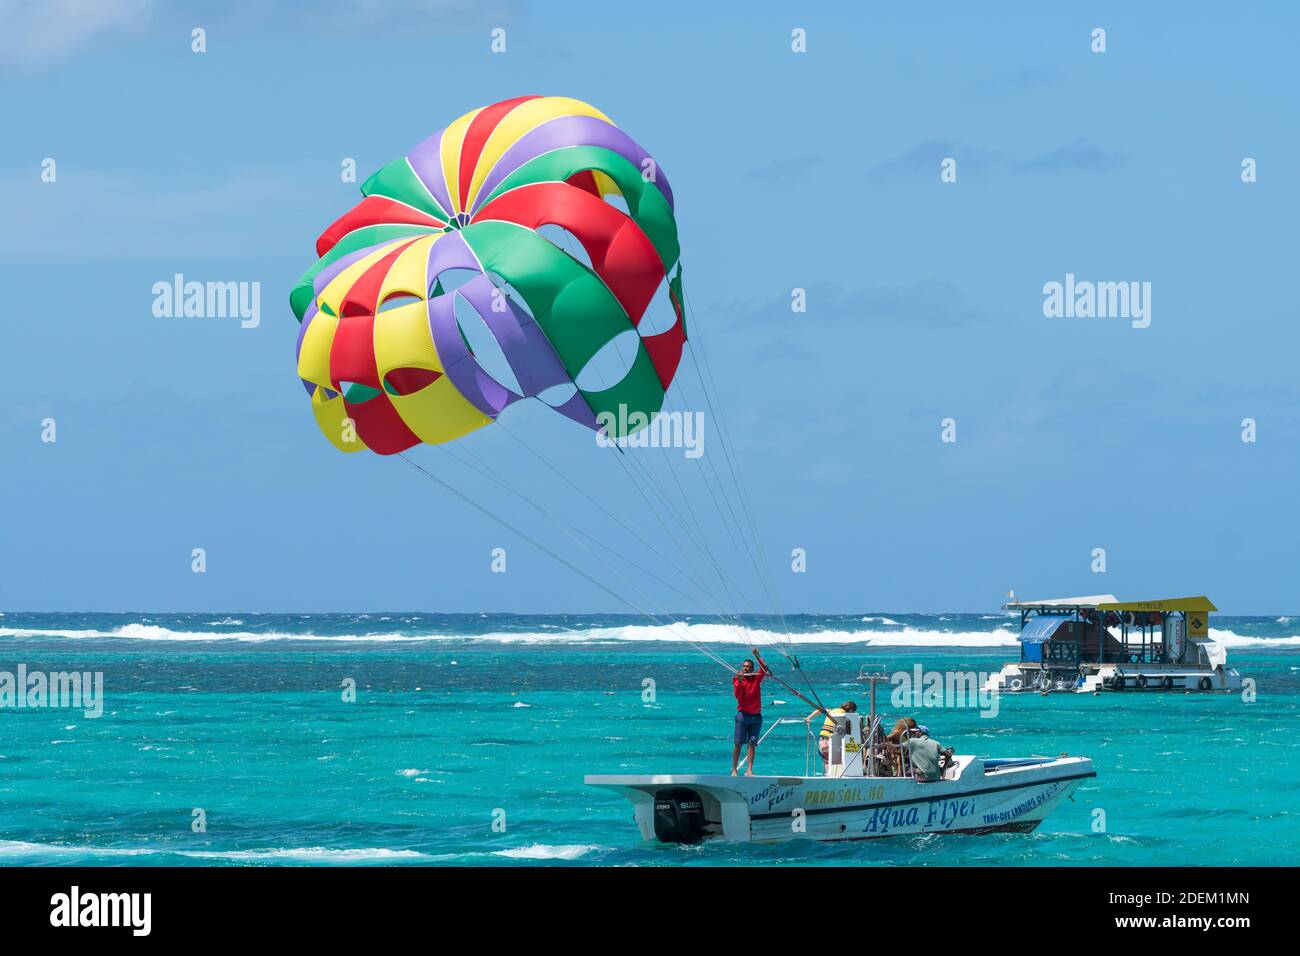 parasailing boat and parachute with people on the turquoise blue coral reef in Mauritius concept water sport activity and lifestyle Stock Photo